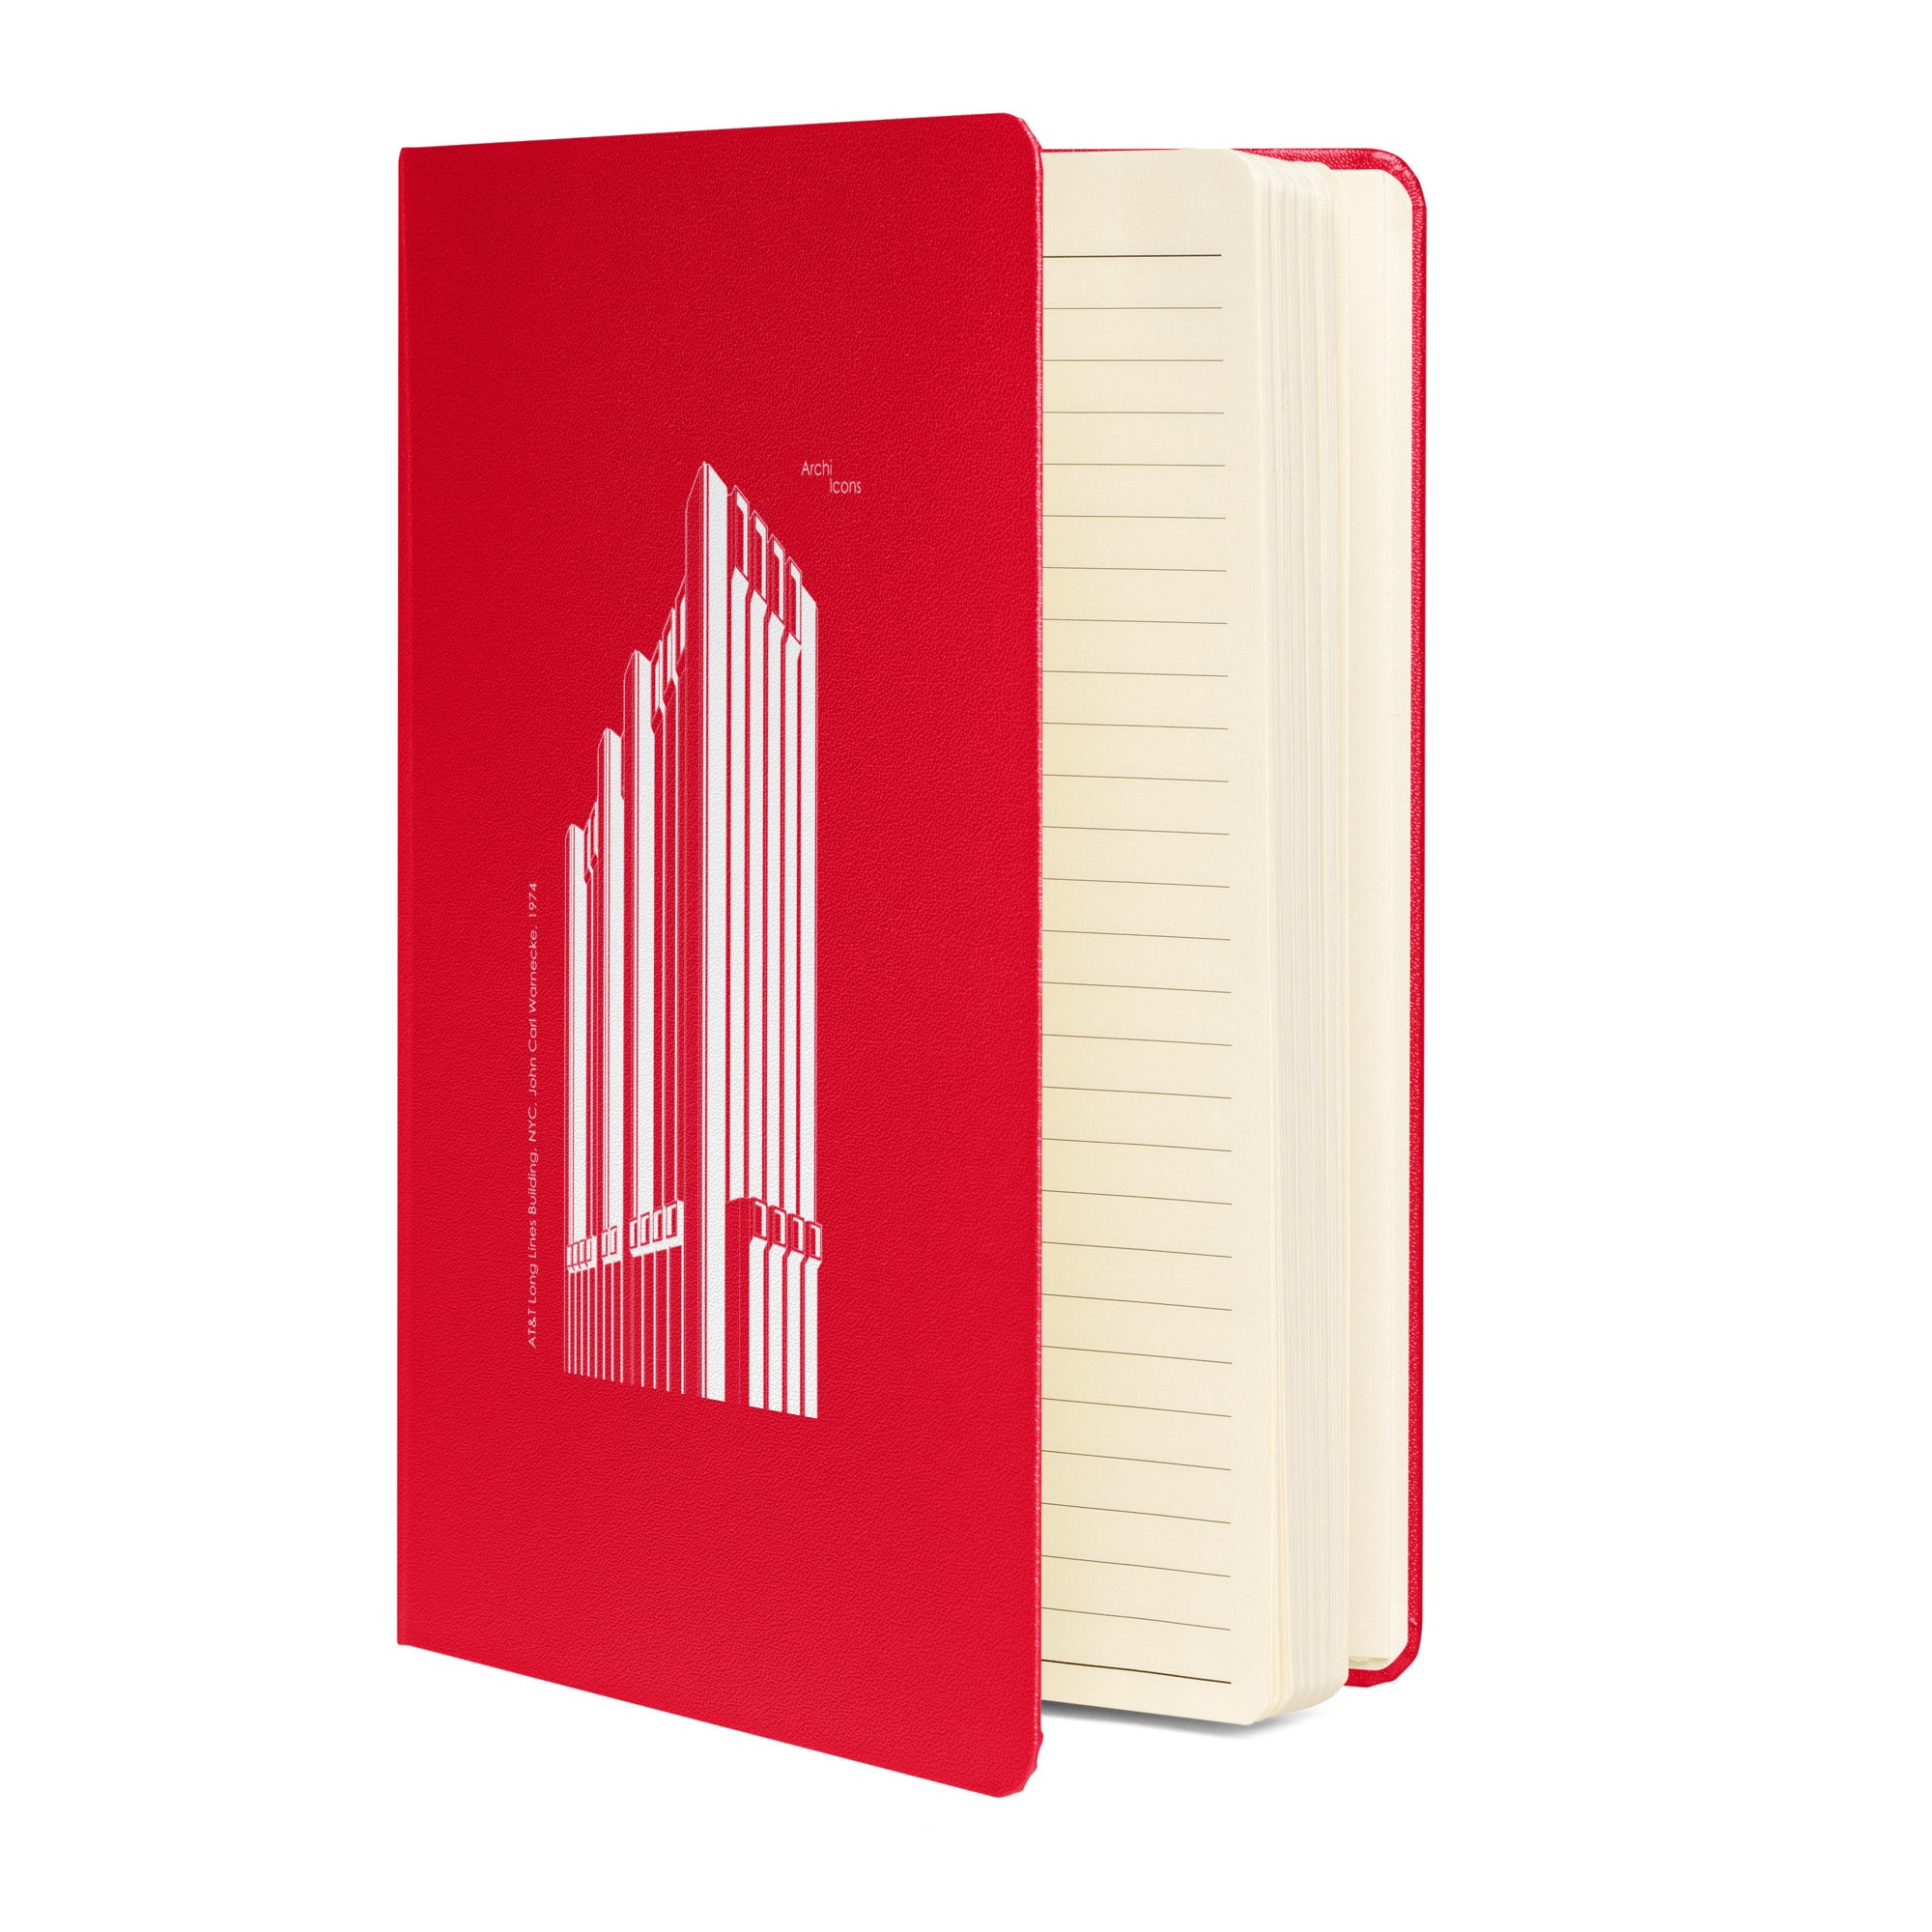 AT&T Long Lines Building Hardcover Notebook